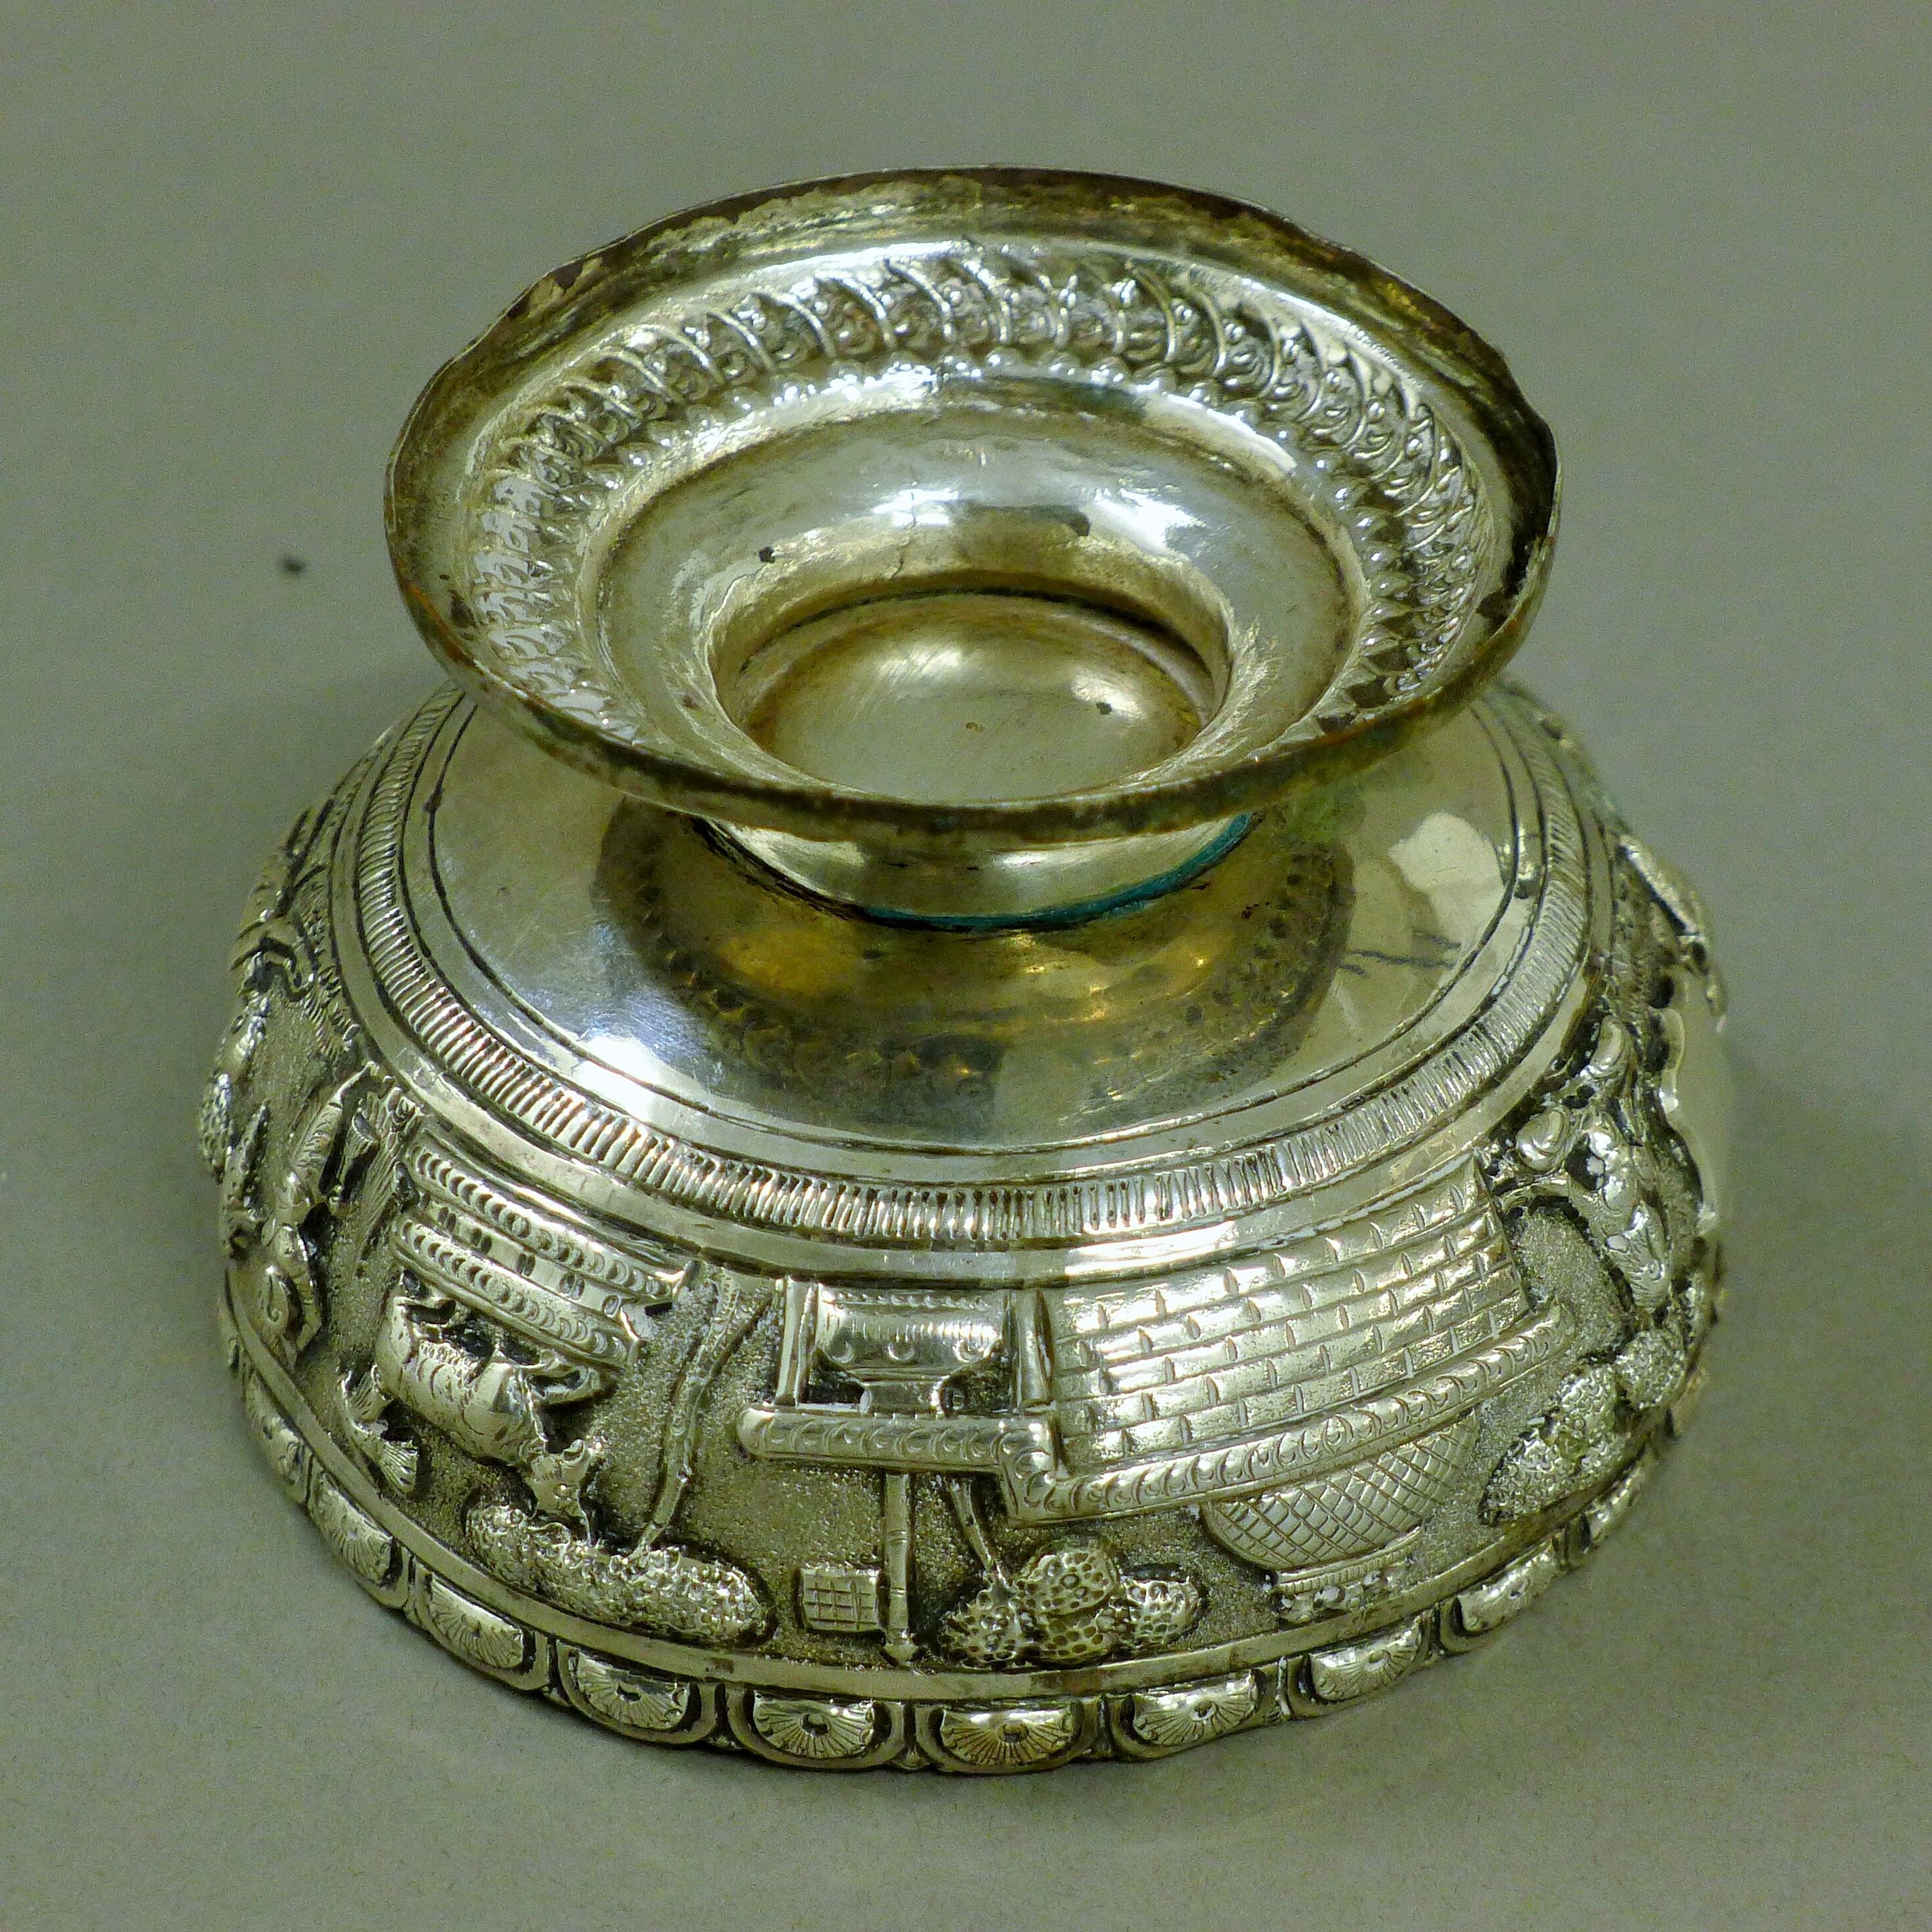 An Indian silver bowl with repousse decoration of rural scenery. 10 cm diameter. 85.9 grammes. - Image 5 of 5